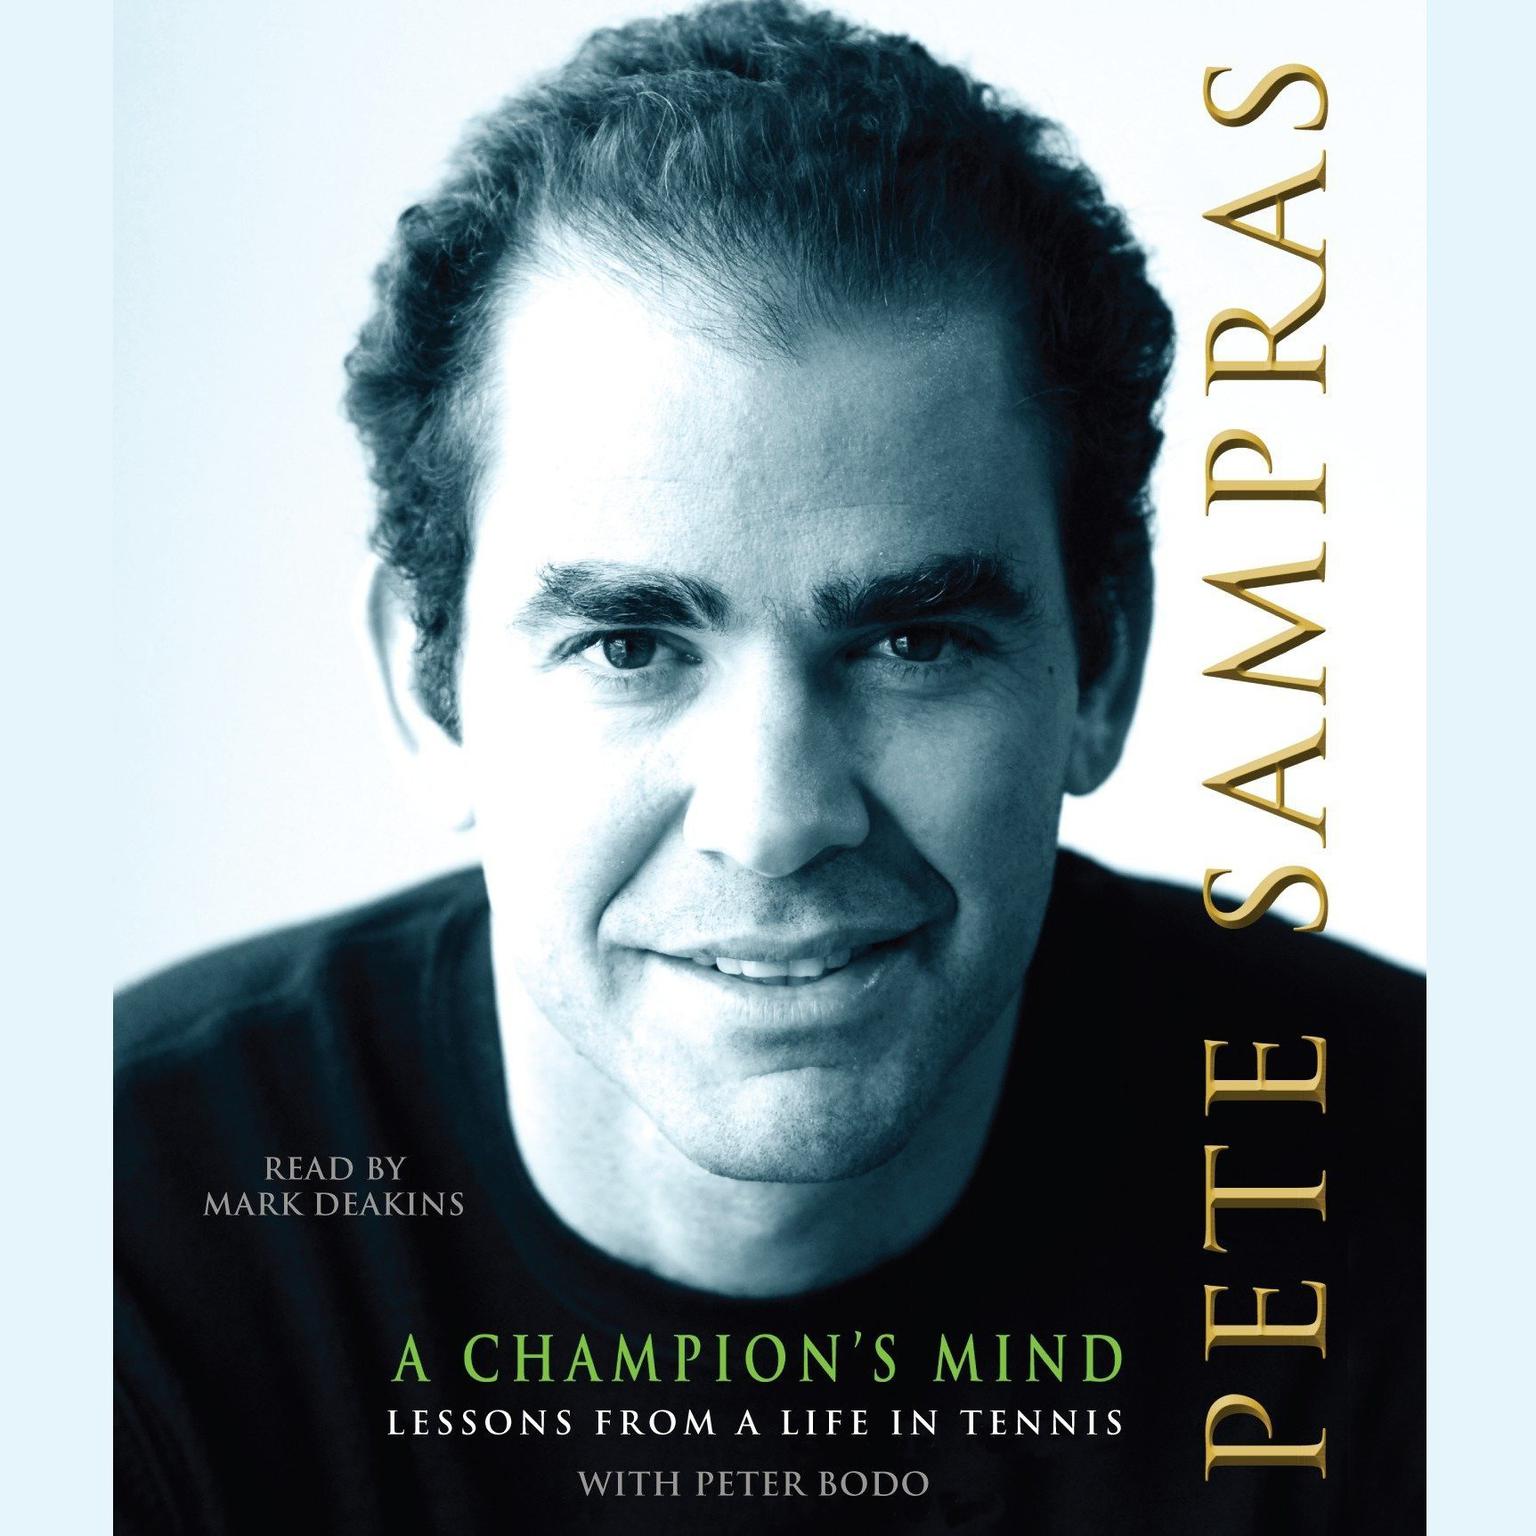 A Champions Mind (Abridged): Lessons from a Life in Tennis Audiobook, by Pete Sampras